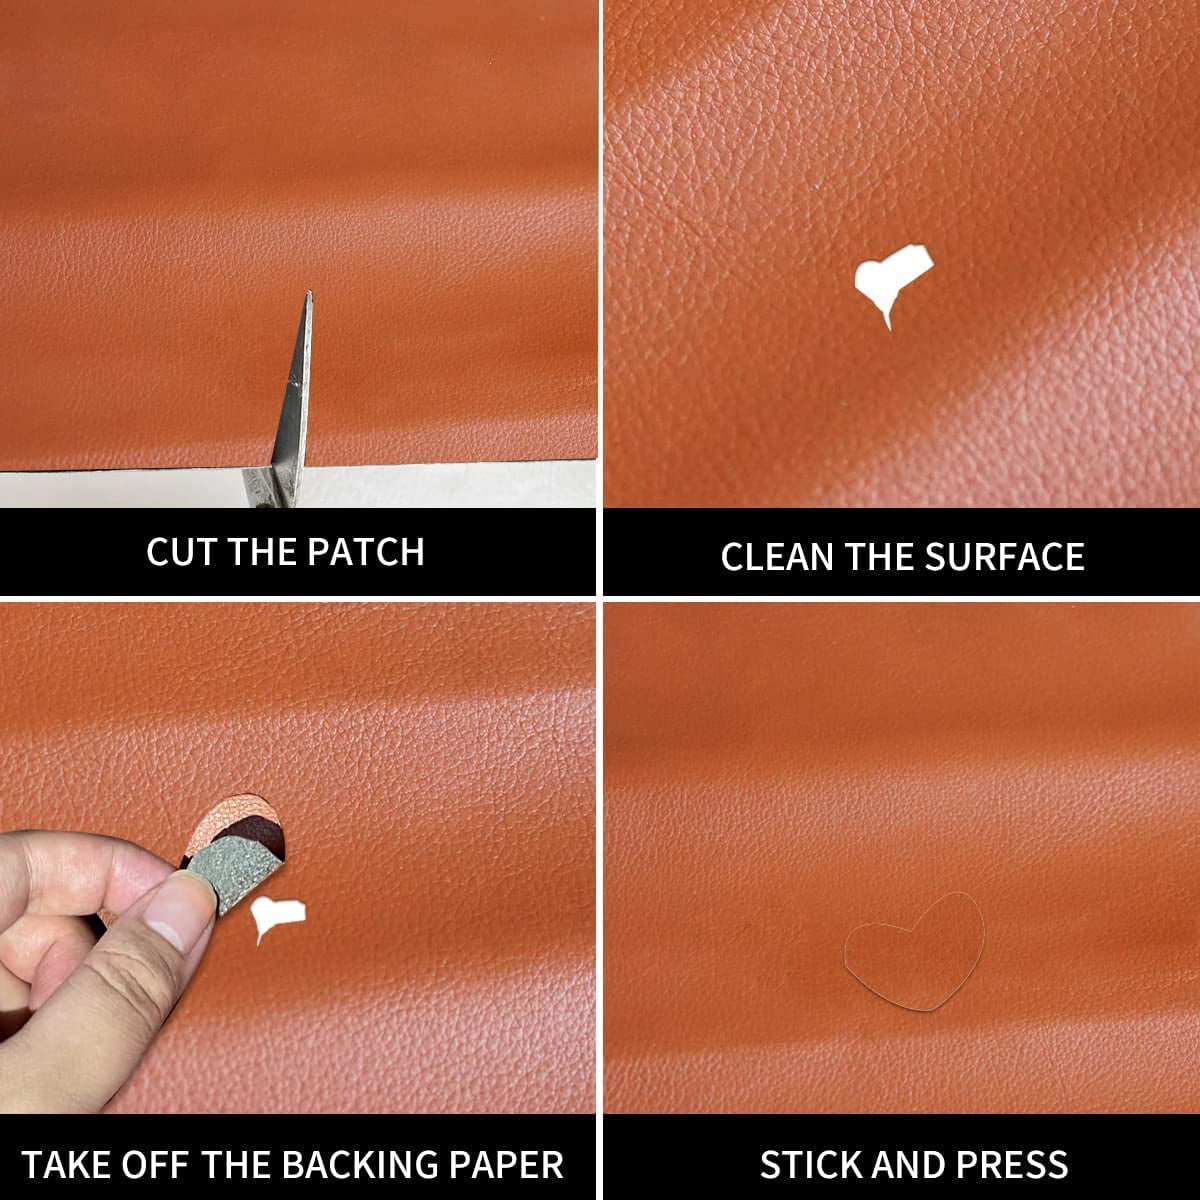  GELAISI Leather Repair Patch, 15.7 X 59 Inch Large